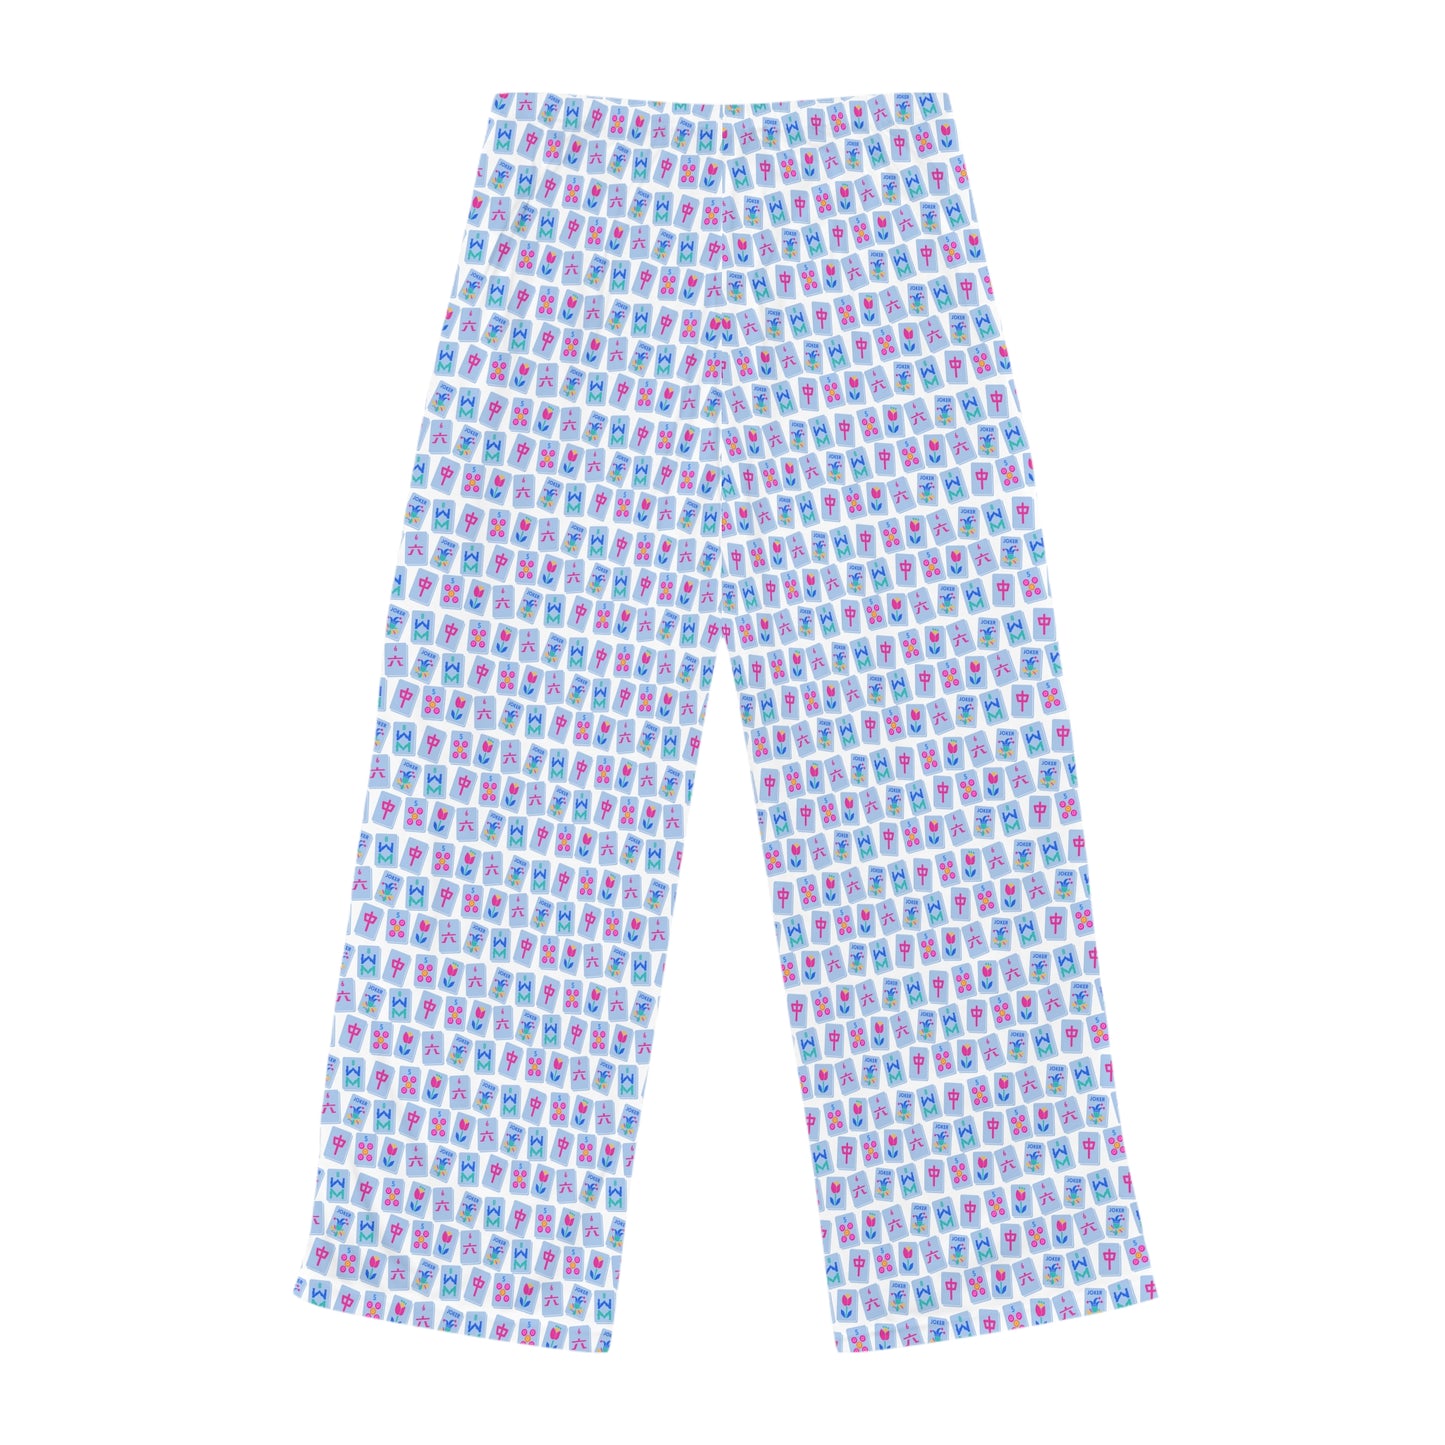 Mahjong Pattern Pajama Pants | Colorful Tiles on Relaxed Fit Sleepwear | Great Gift for Mahjong Players